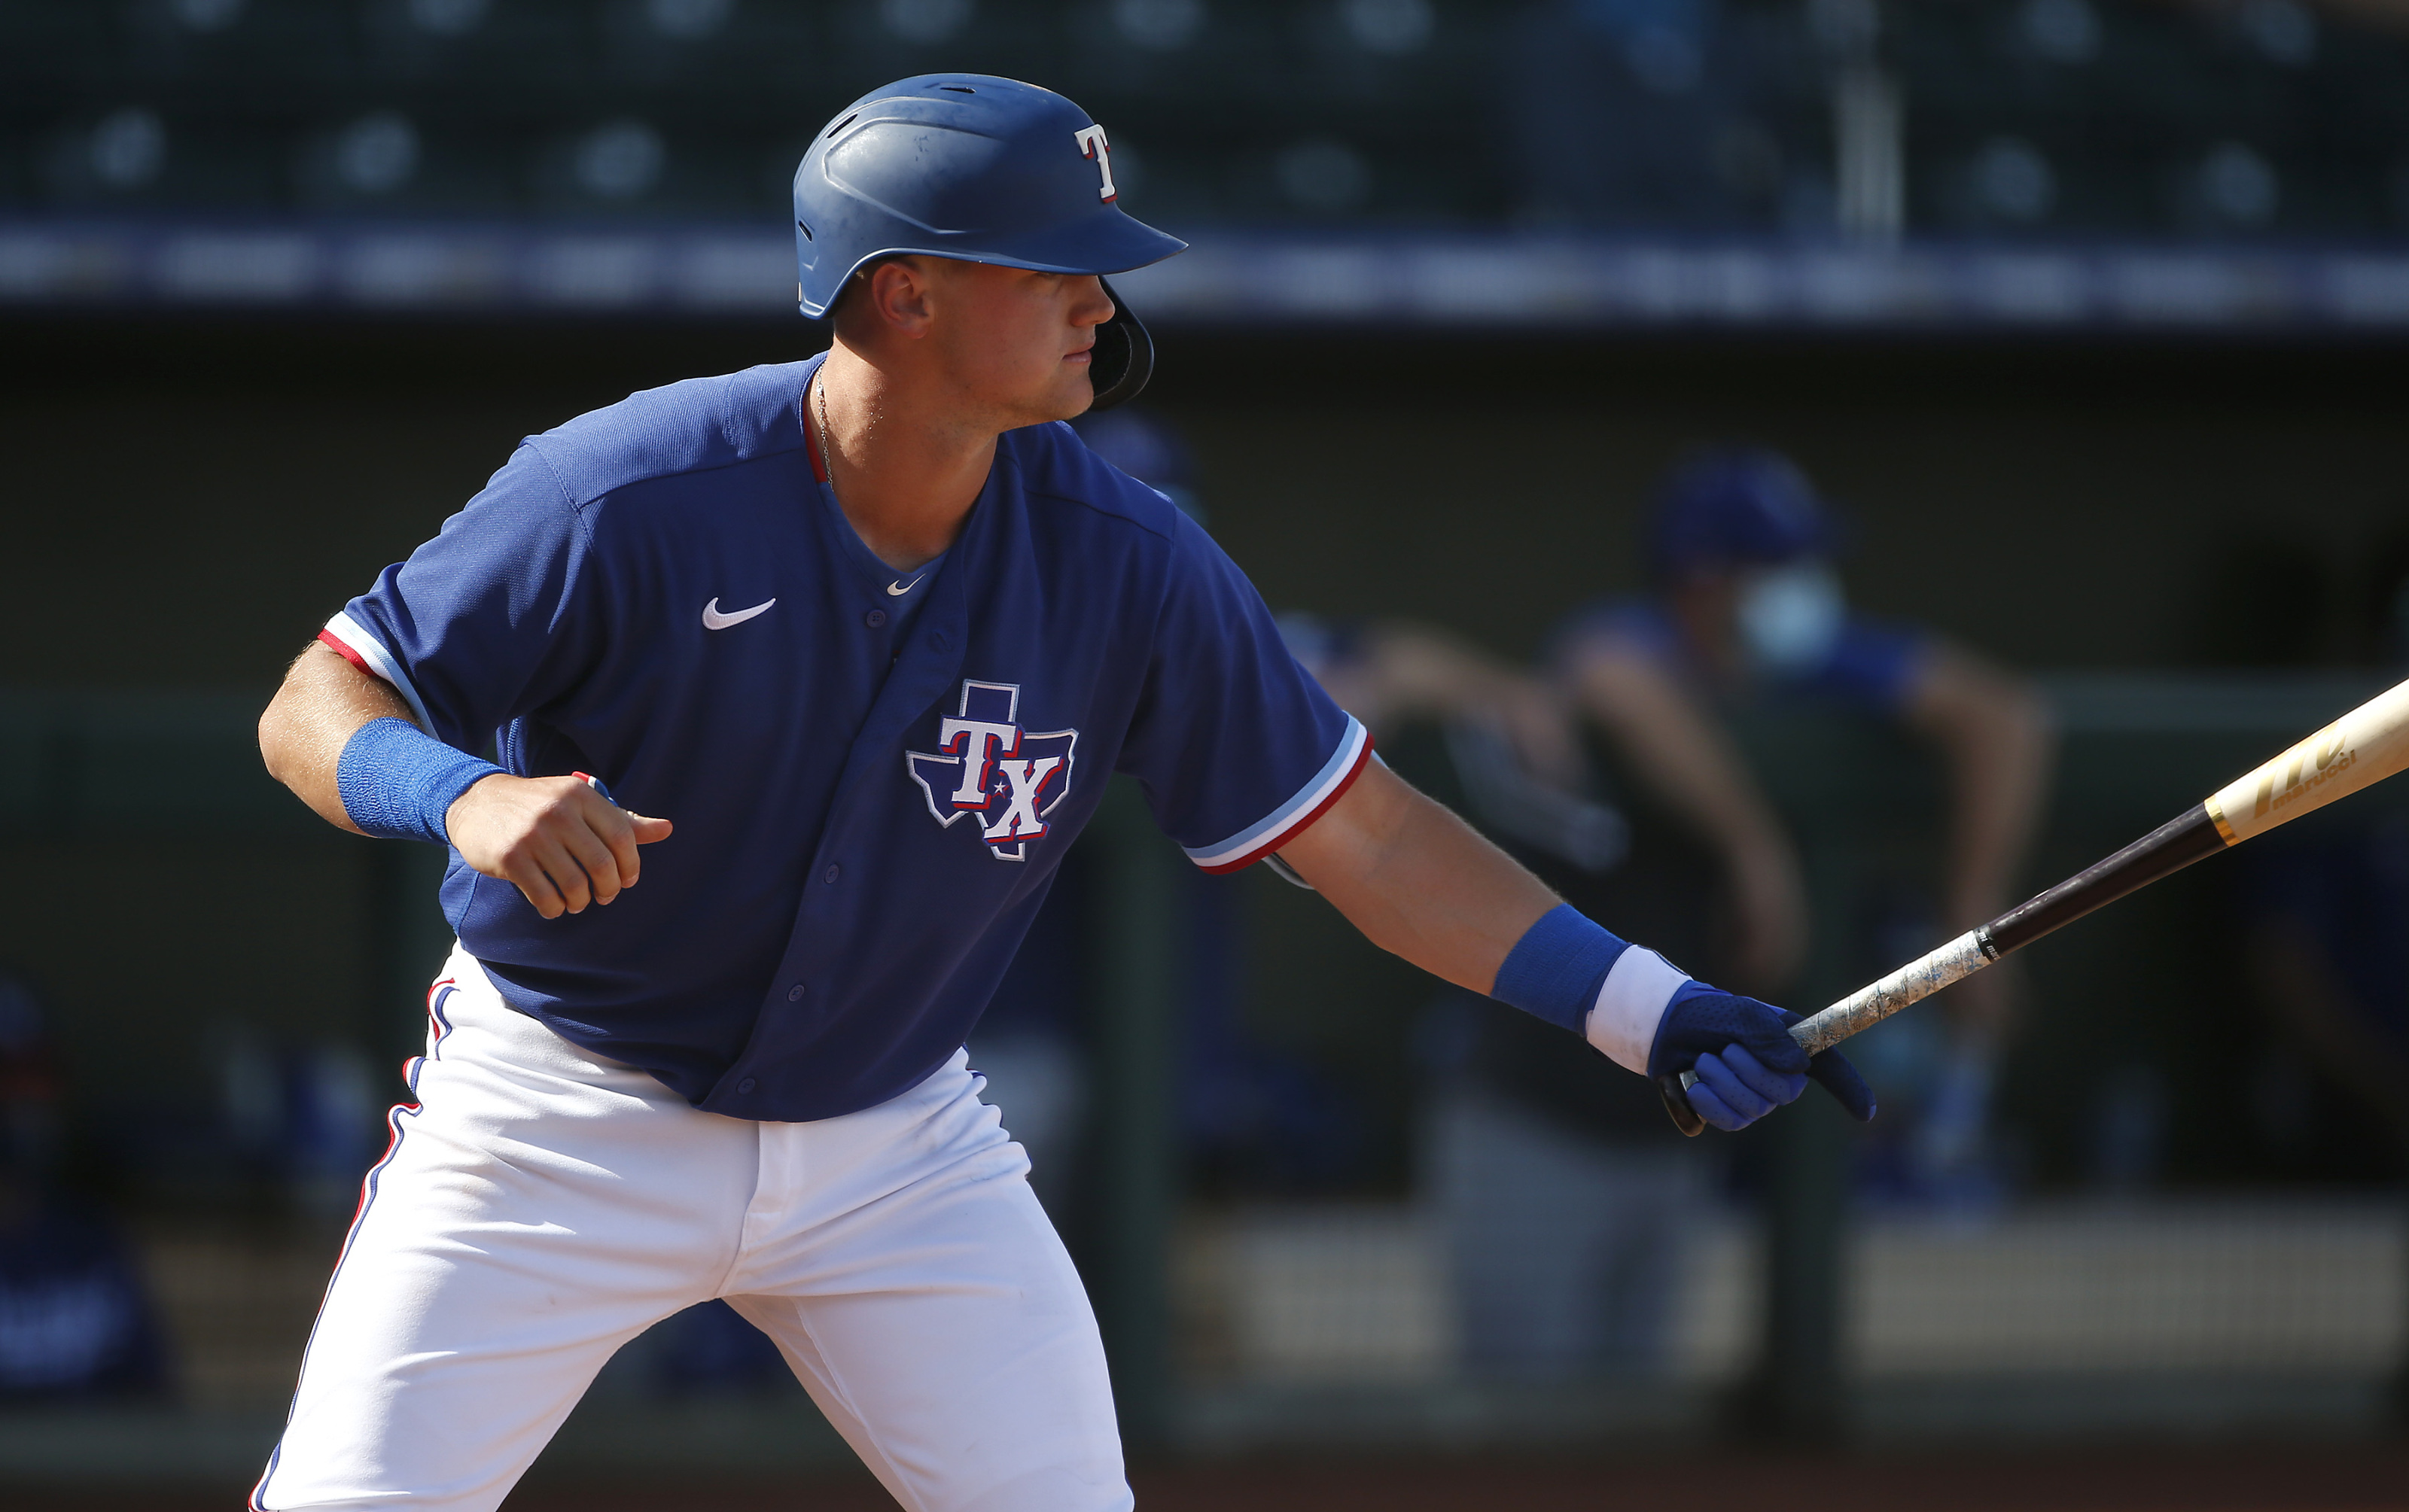 Texas Tech baseball alums: Josh Jung is ready for the big leagues